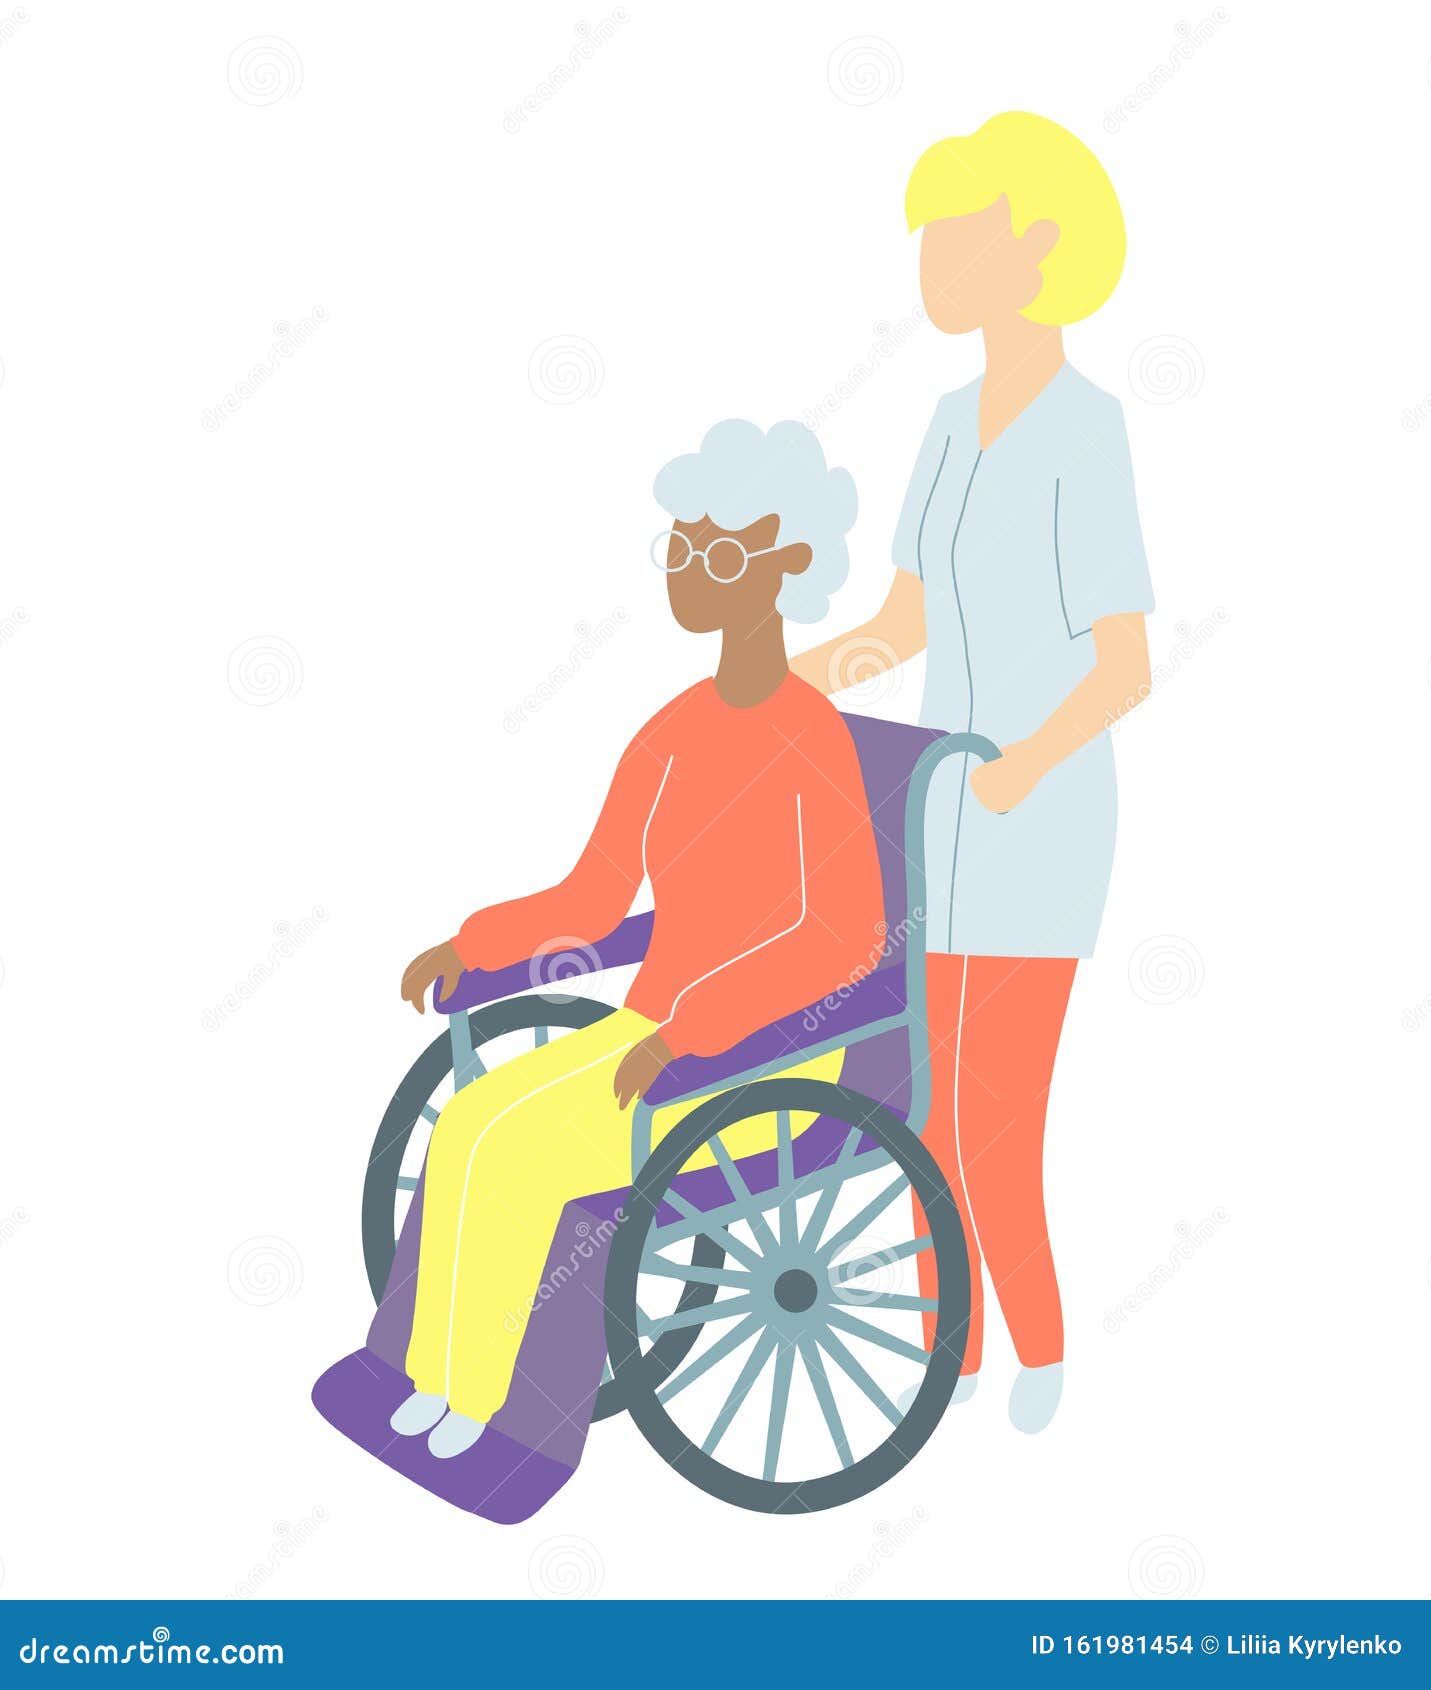 nursing home. care for people with disabilities and oldster. carers and social workers